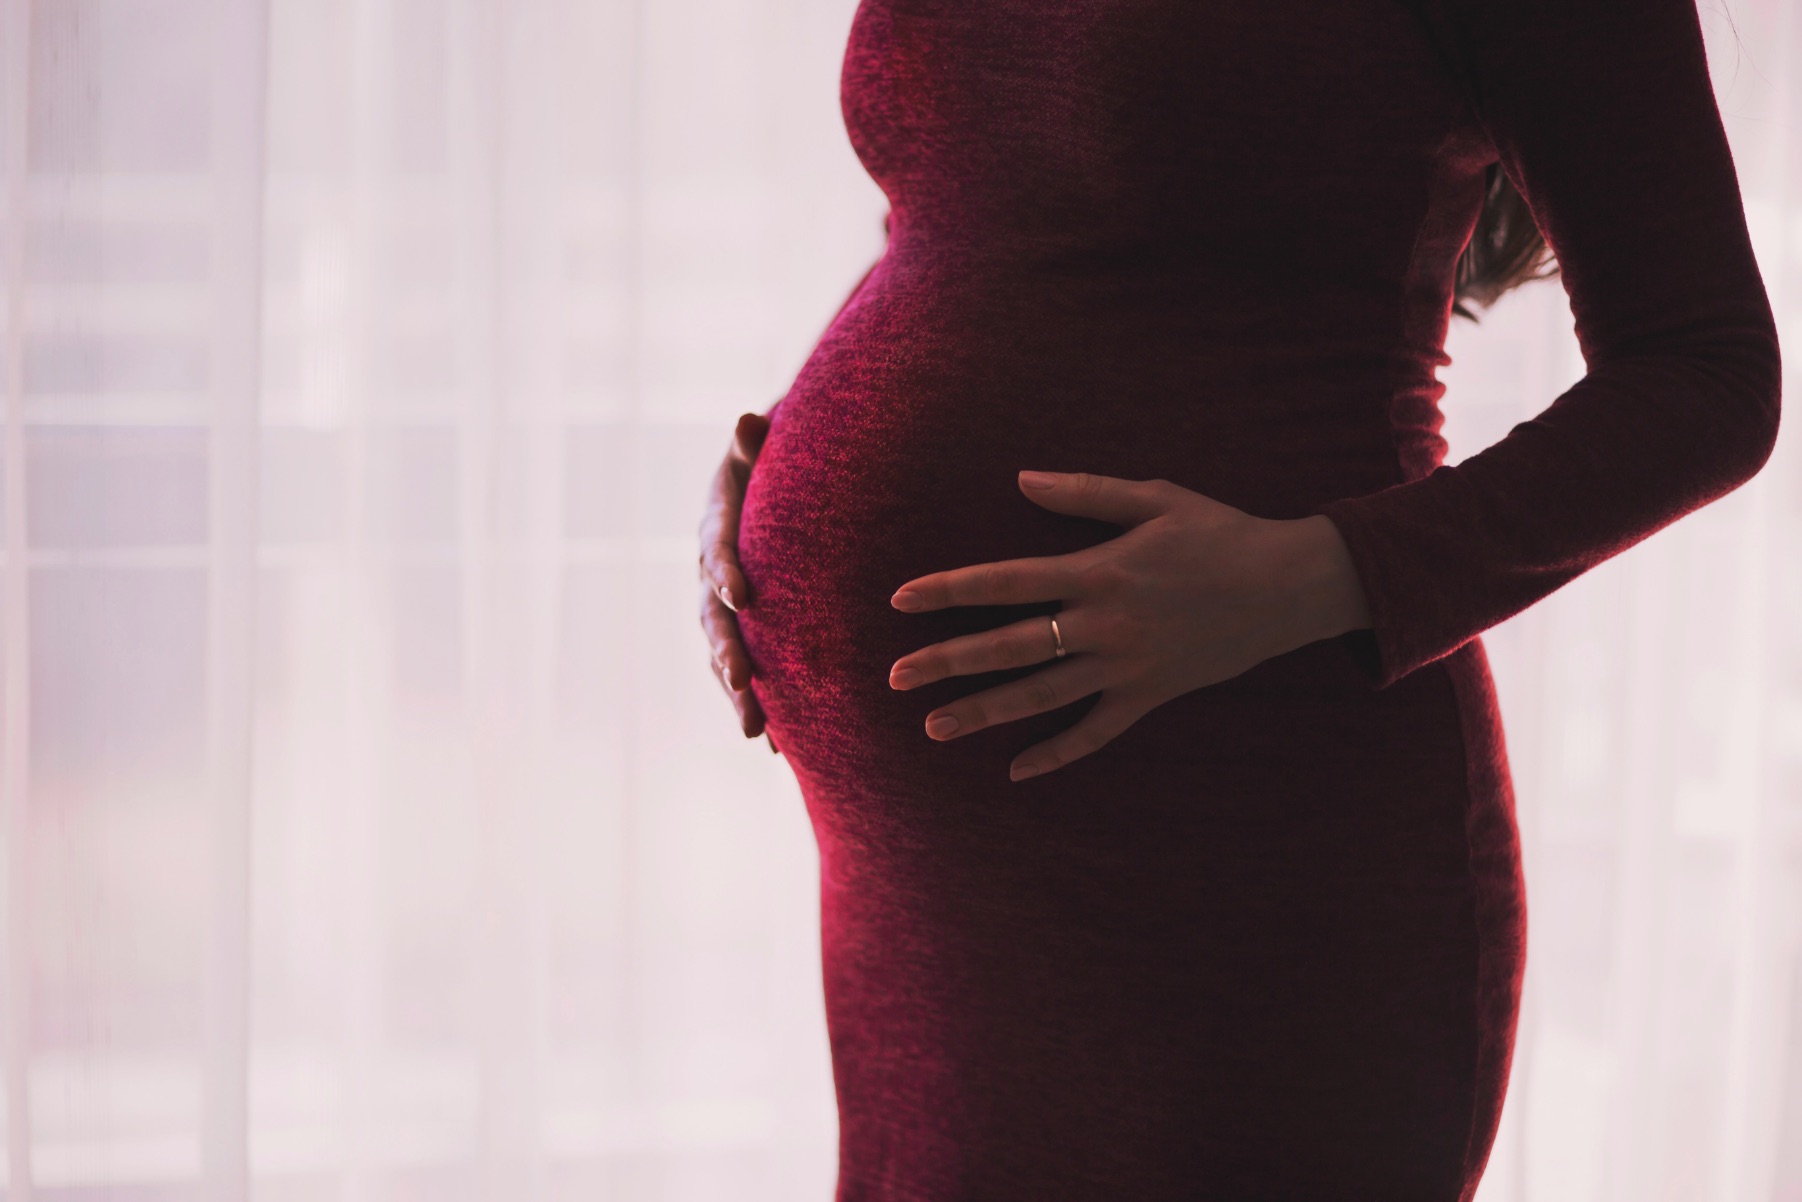 What You Need to Know About Separation or Divorce During Pregnancy